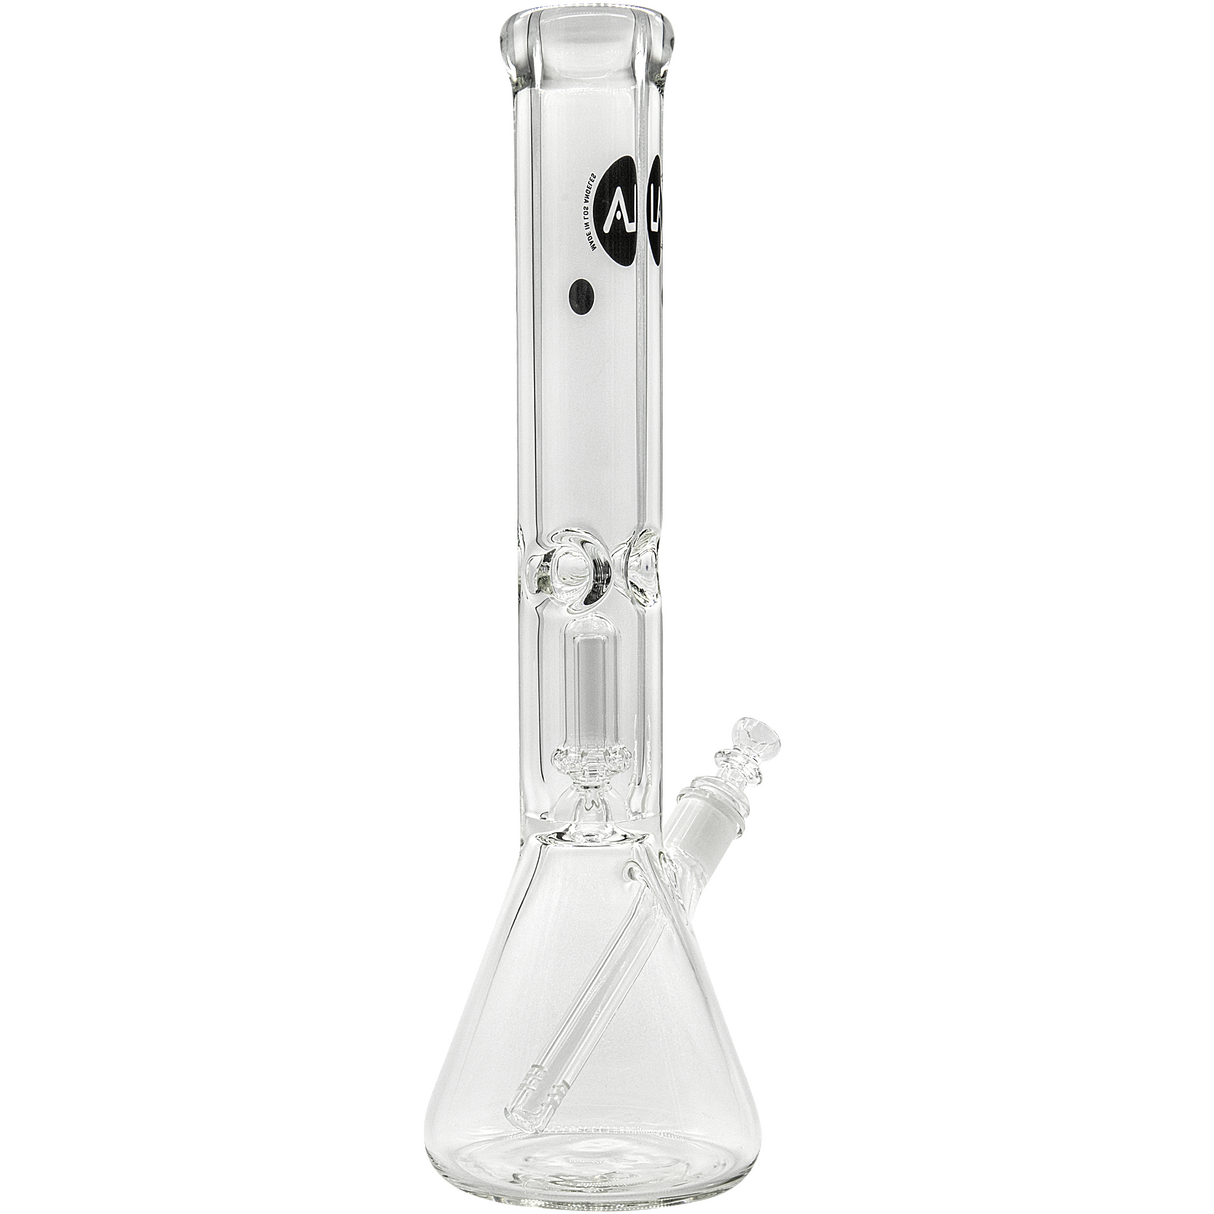 LA Pipes "King Bong" 9mm Thick Beaker Bong with Showerhead Percolator, Clear Borosilicate Glass, Front View